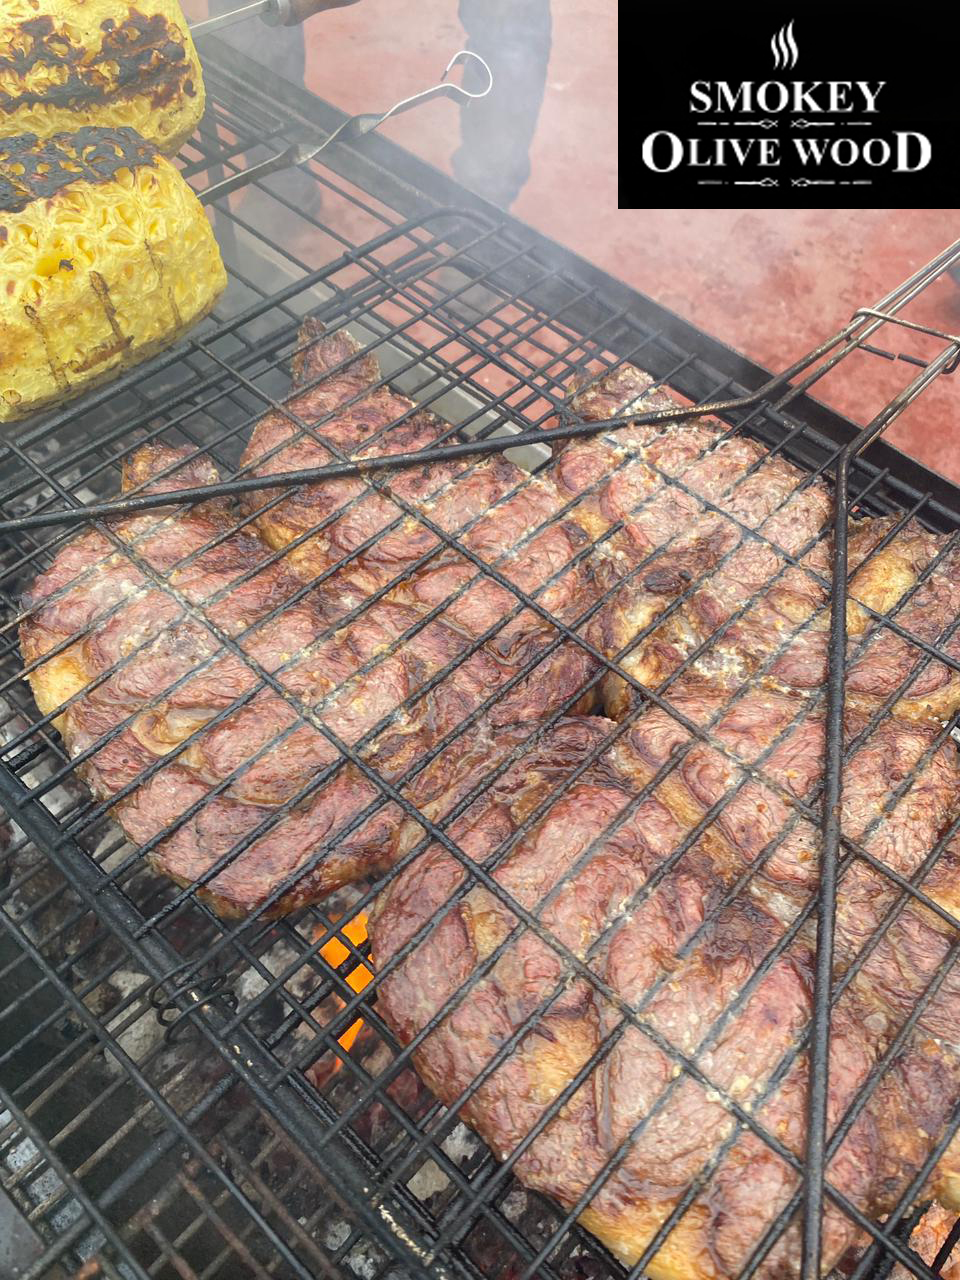 Smokey Olive Wood on Twitter: "A little impression from yesterdays  Brazilian BBQ. #SmokeyOliveWood #barbecue #fumare #fumarecibo #churrasco  #Churrascodefumado #comidadefumada #steak #Olivewood #Olivenholz #BBQ #grill  #grillin #grilling #Pineapple #fire ...